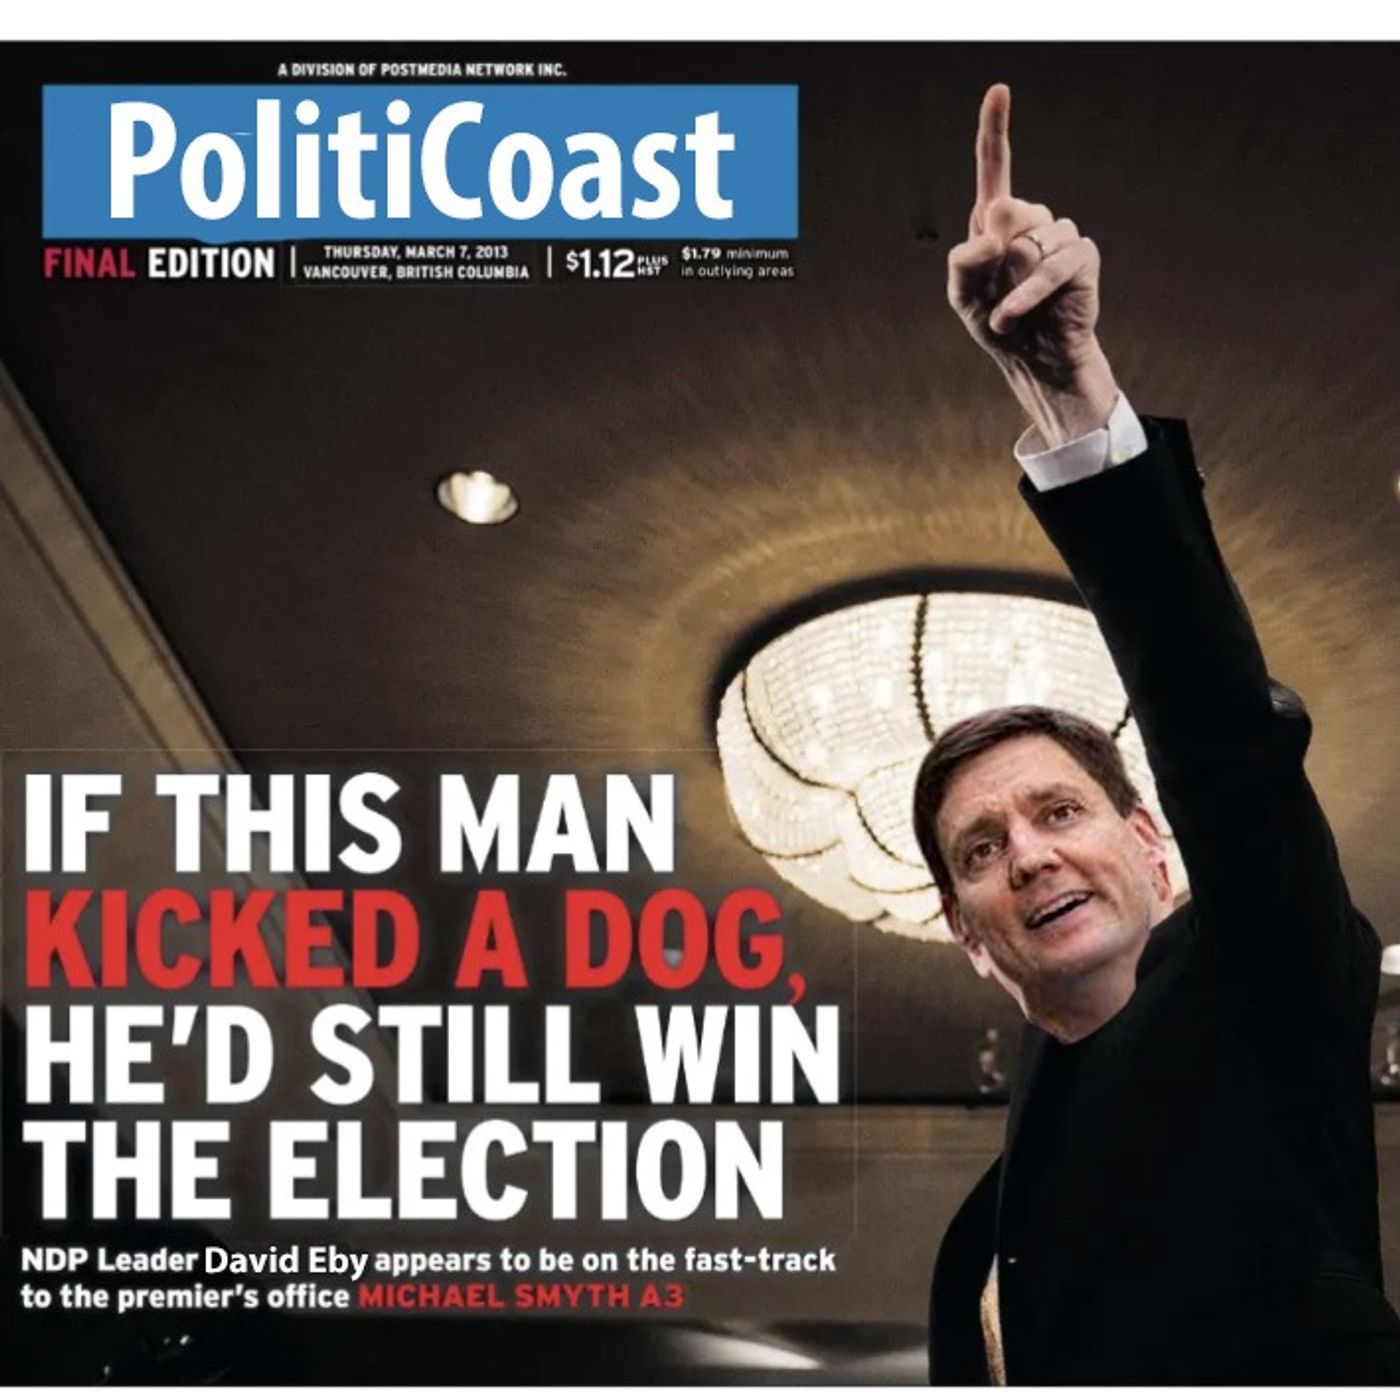 If this man kicked a dog, he’d still win the election